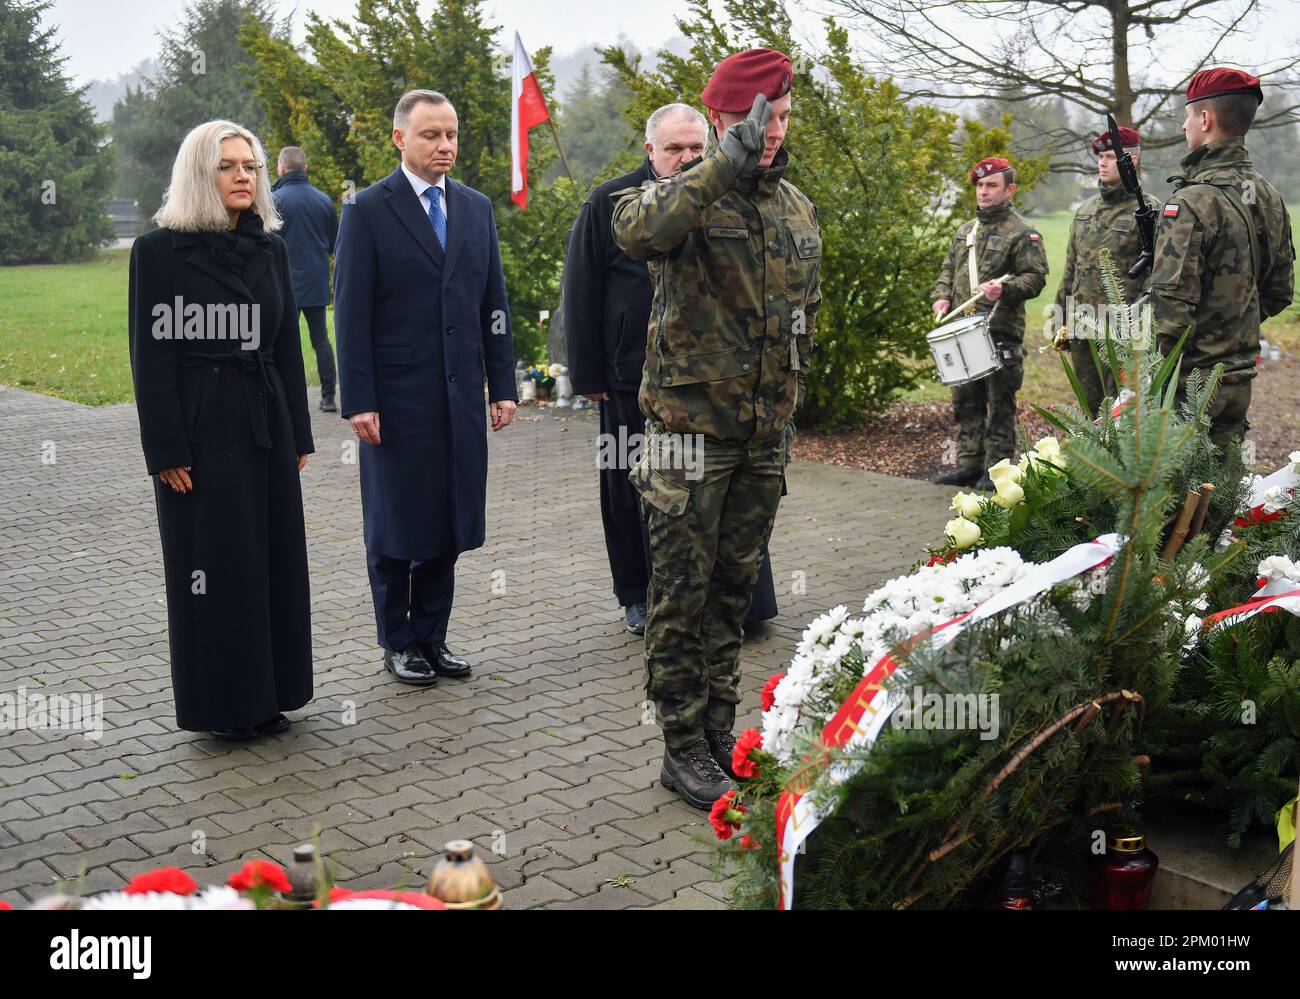 Malgorzata Wassermann (daughter of Zbigniew Wassermann) and the President of Poland Andrzej Duda seen at the grave of Zbigniew Wassermann, during the 13th anniversary Cemetery of his death in Bielany, Krakow. President Andrzej Duda attends the 13th anniversary of the government plane (TU154M) crash in Smolensk. The delegation led by President Lech Kaczynski died on the way to the ceremony in Katyn on April 10, 2010. 96 people were killed, including the President of the Republic of Poland Lech Kaczynski, and his wife, MPs, ministers, senators, military commanders, and others. (Photo by Alex Bon Stock Photo